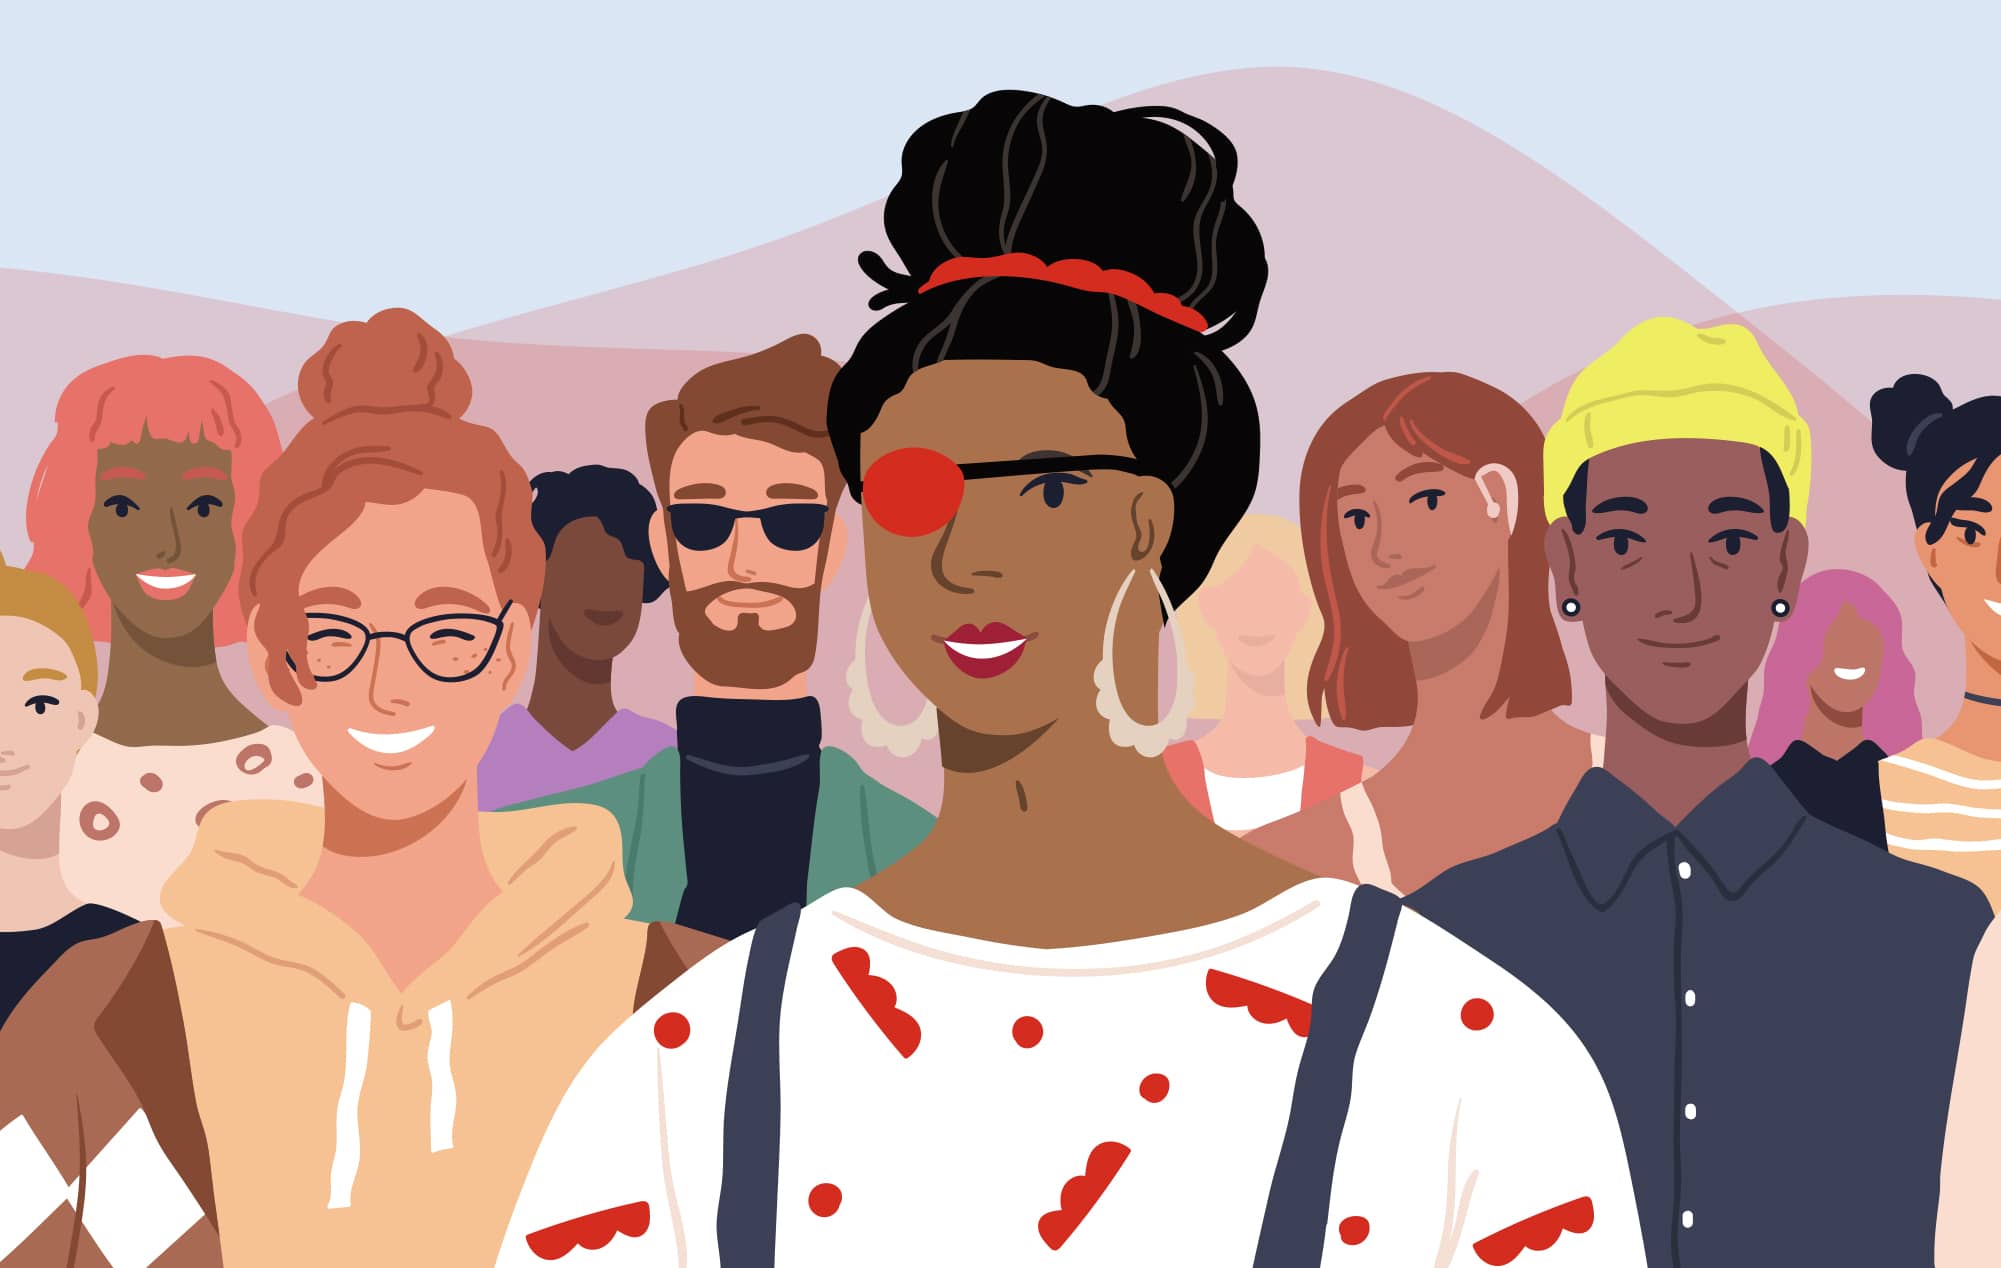 Illustration of a group of people standing together; the woman in the center has her hair up and wears a red headband, matching her red eyepatch.